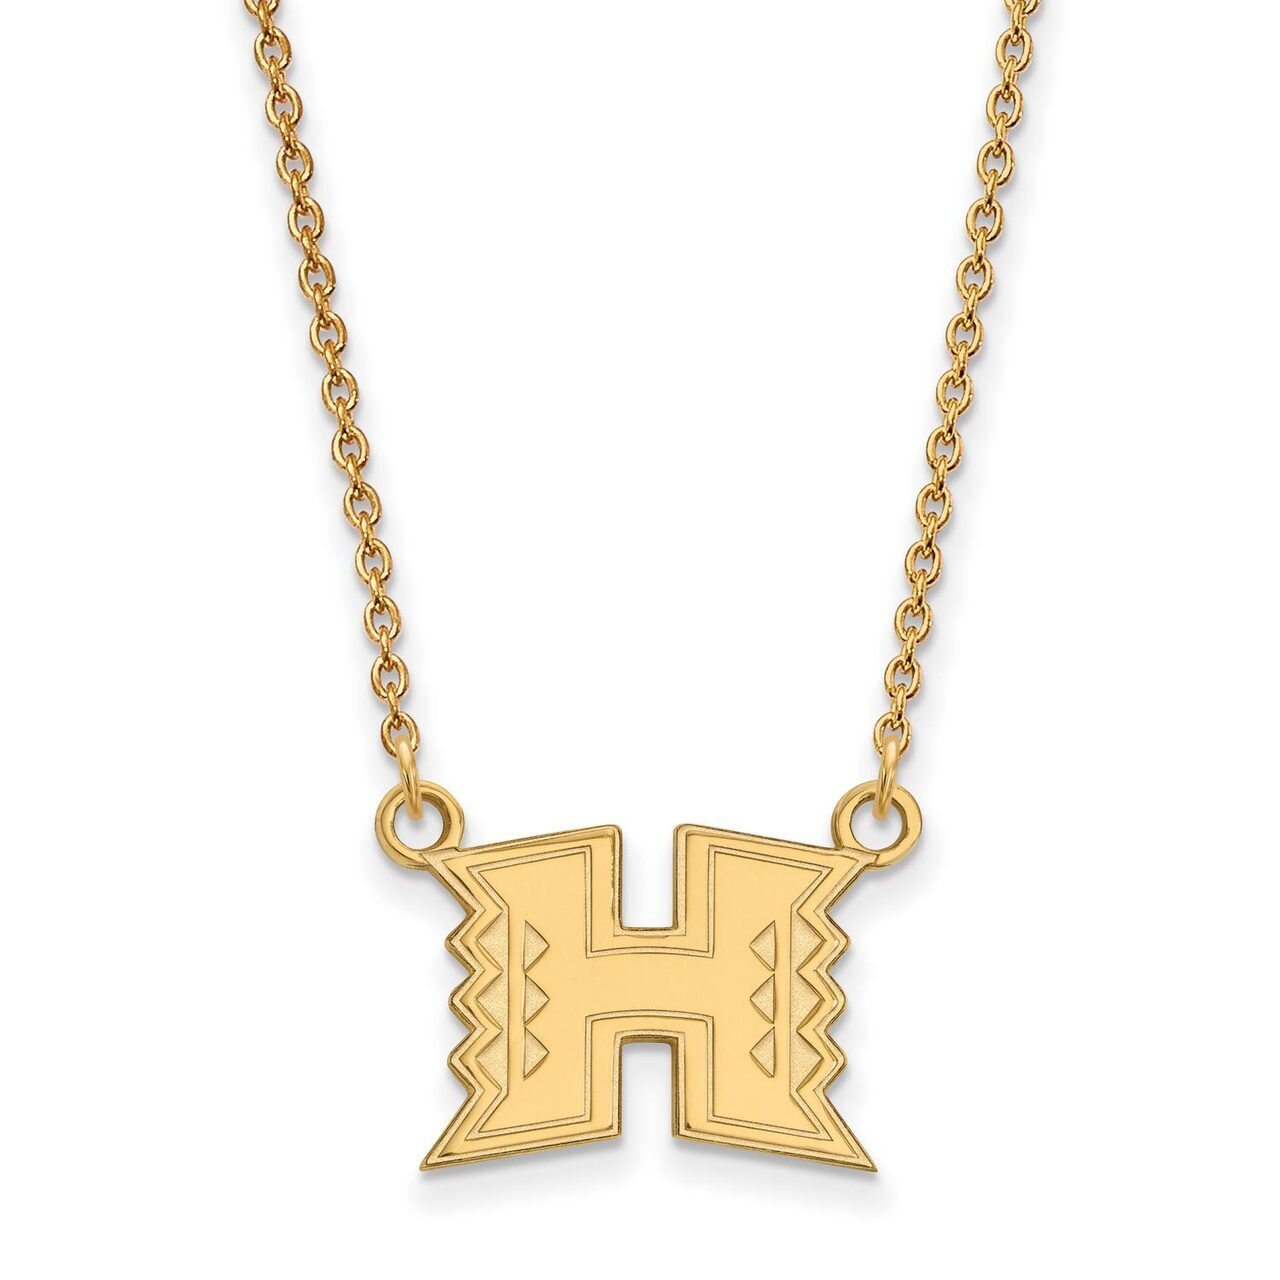 The University of Hawaii Small Pendant with Chain Necklace 14k Yellow Gold 4Y009UHI-18